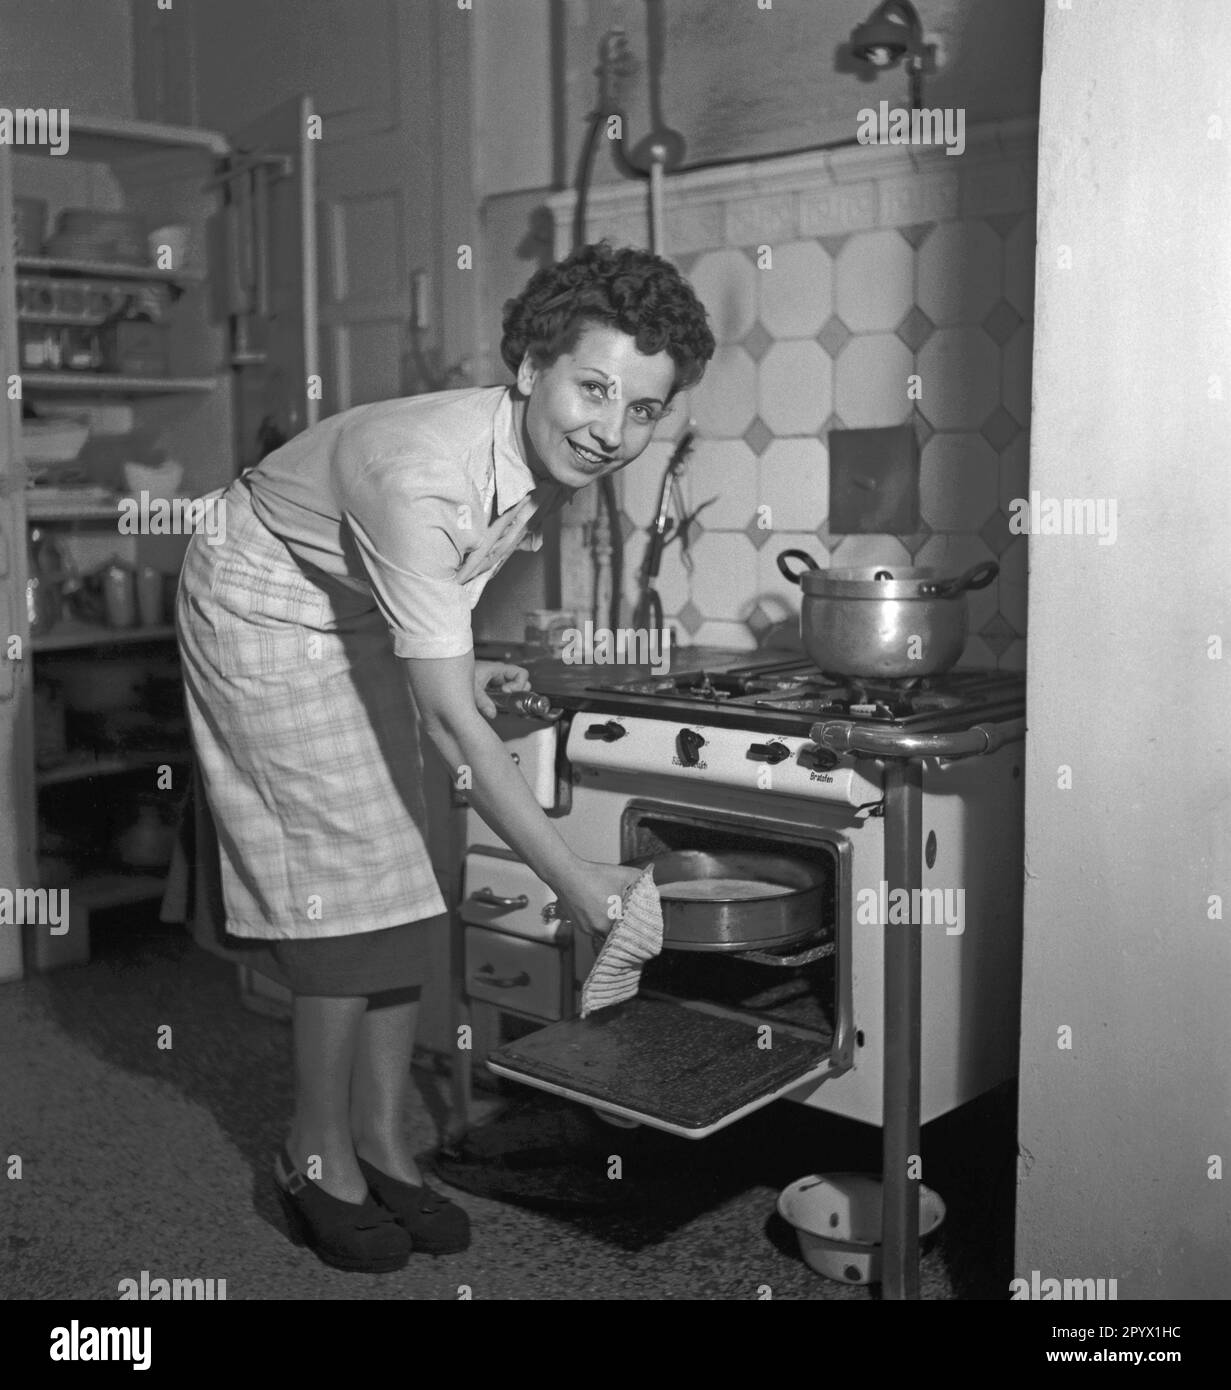 'Housewife while working at the stove. Scene from the series ''We work together''. The photographer accompanies couples in their respective occupations.' Stock Photo